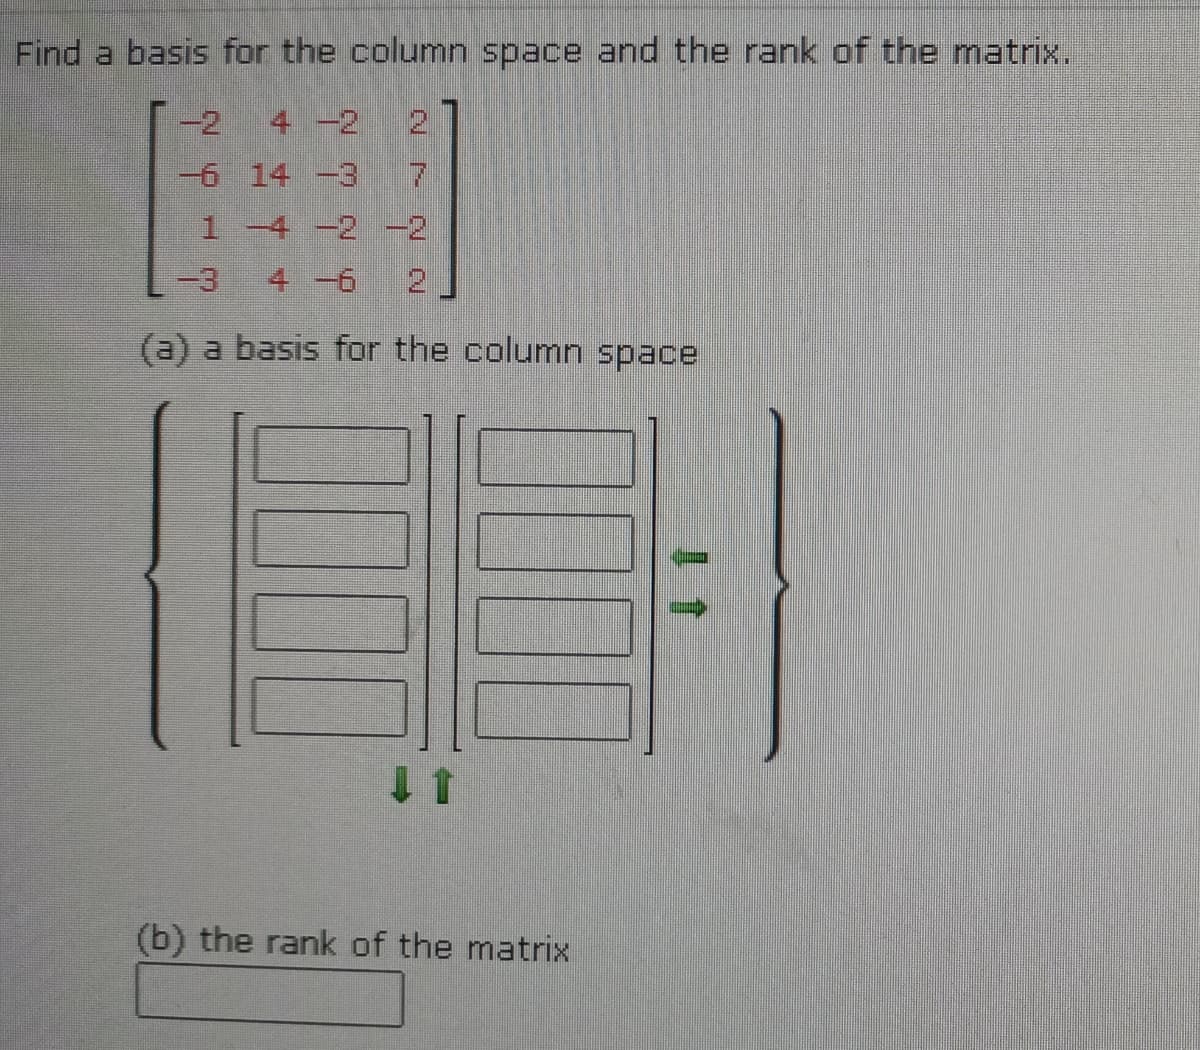 Find a basis for the column space and the rank of the matrix.
-2
4 -2
21
-6 14 -3
1 -4 -2 -2
-3
4 -6
(a) a basis for the column space
(b) the rank of the matrix
